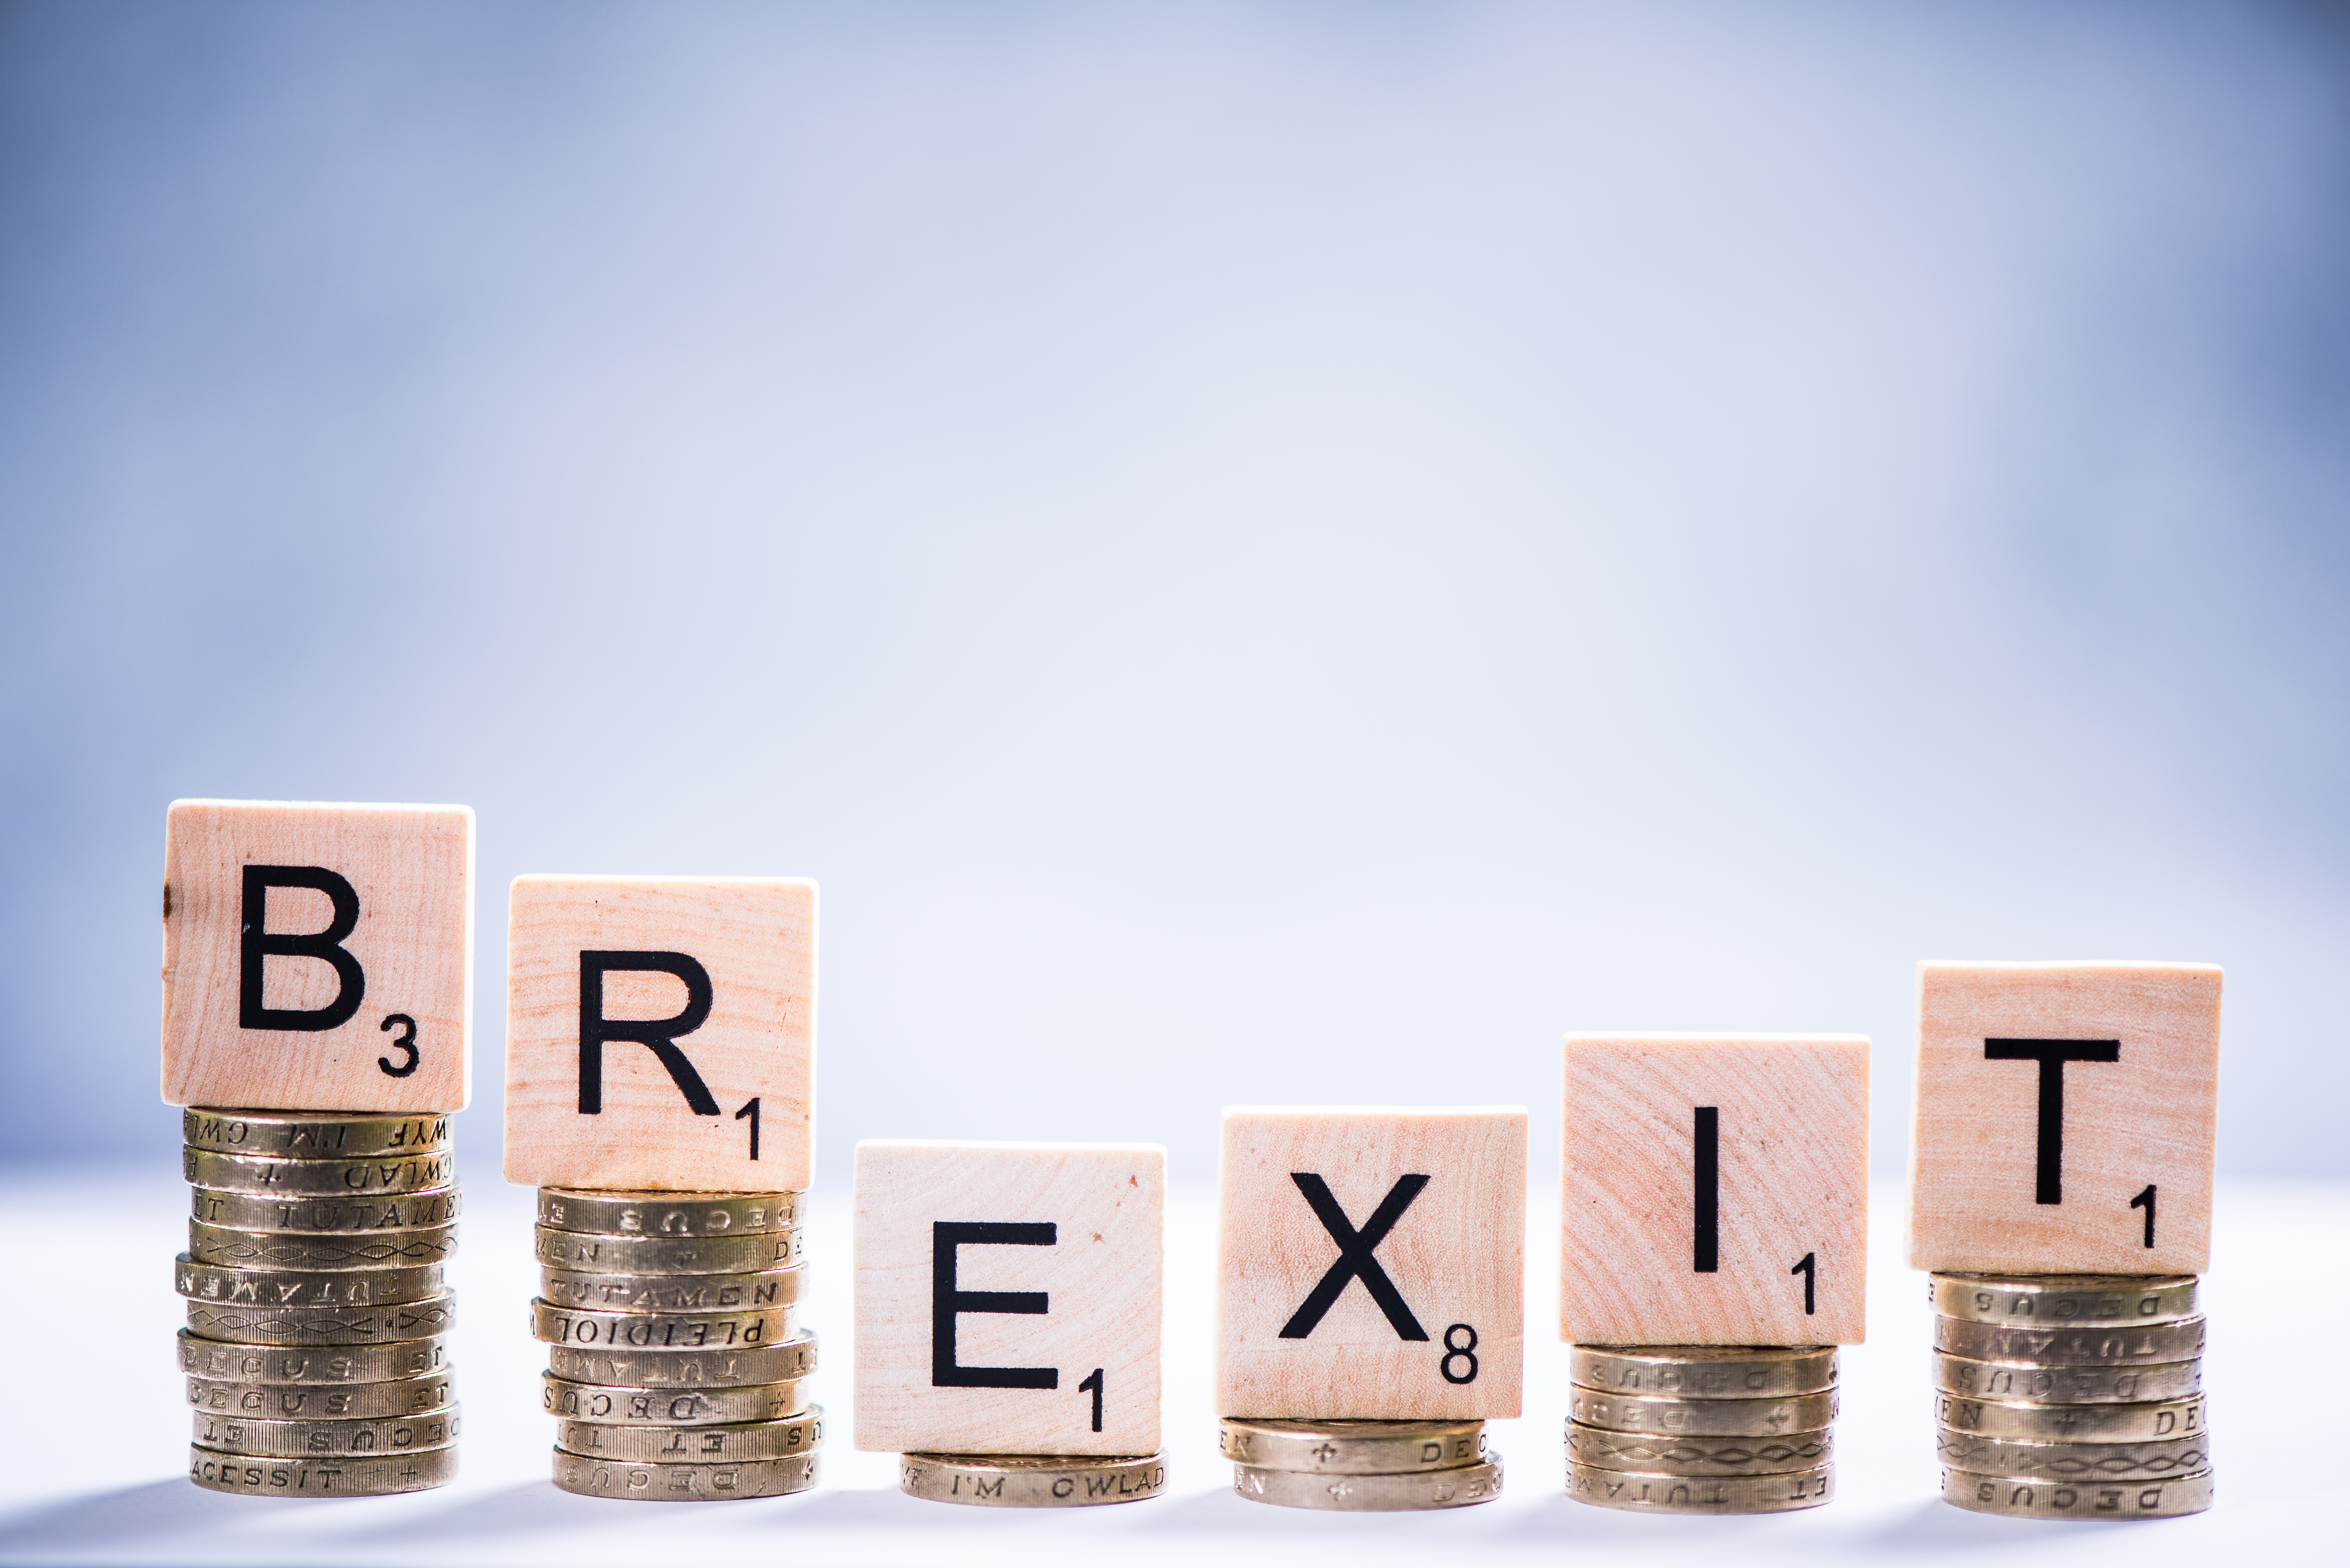 Could Brexit create unforeseen additional cash flow issues? 